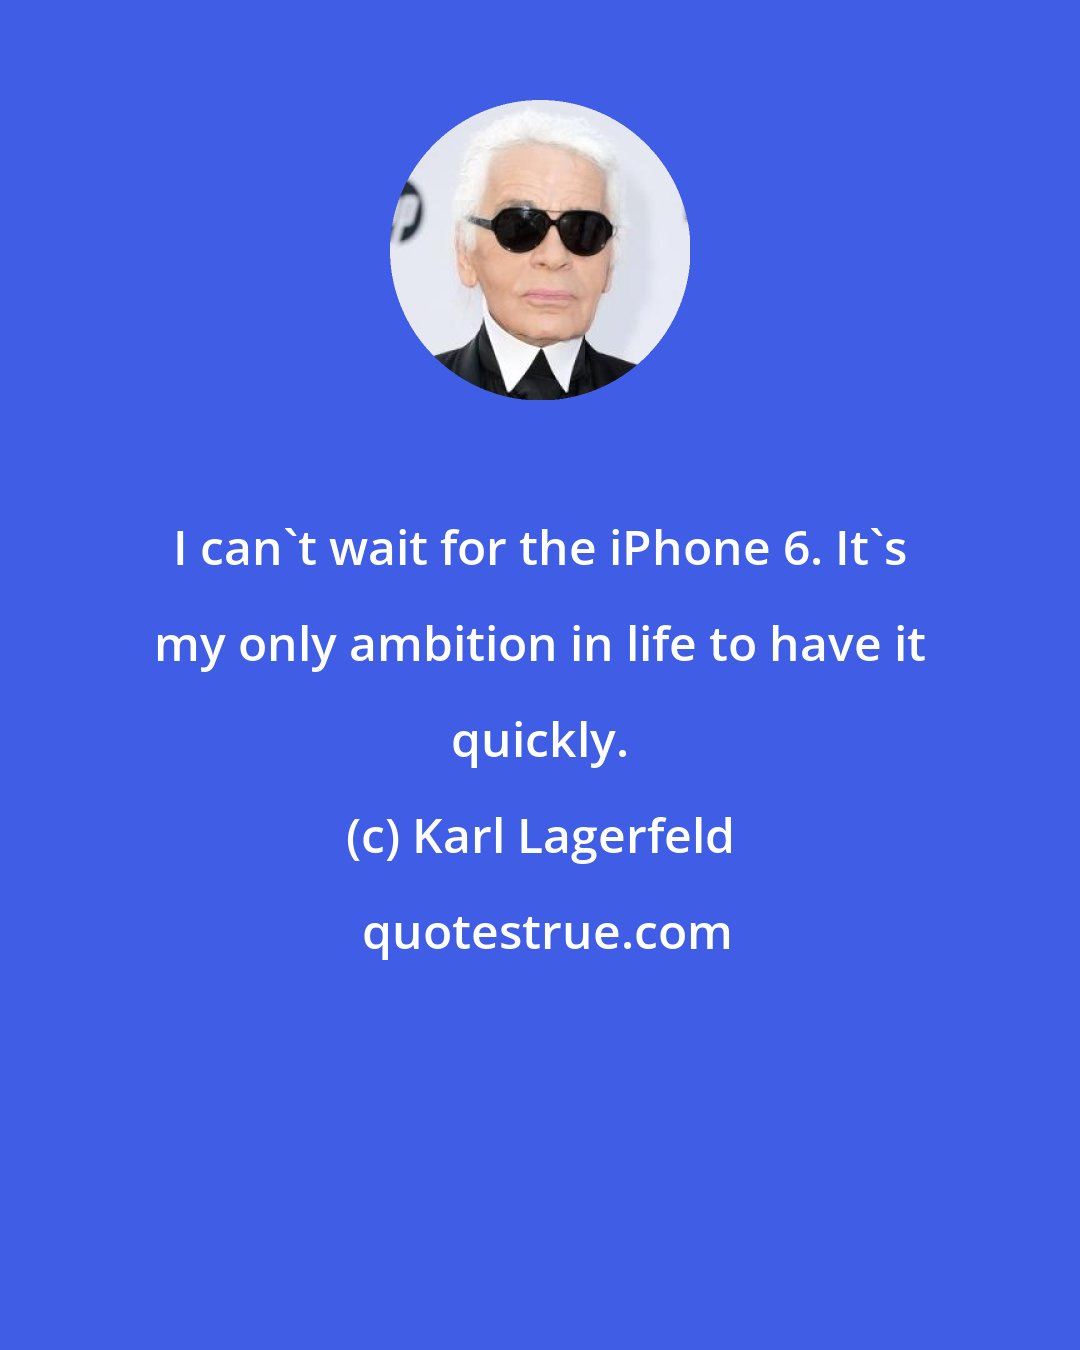 Karl Lagerfeld: I can't wait for the iPhone 6. It's my only ambition in life to have it quickly.